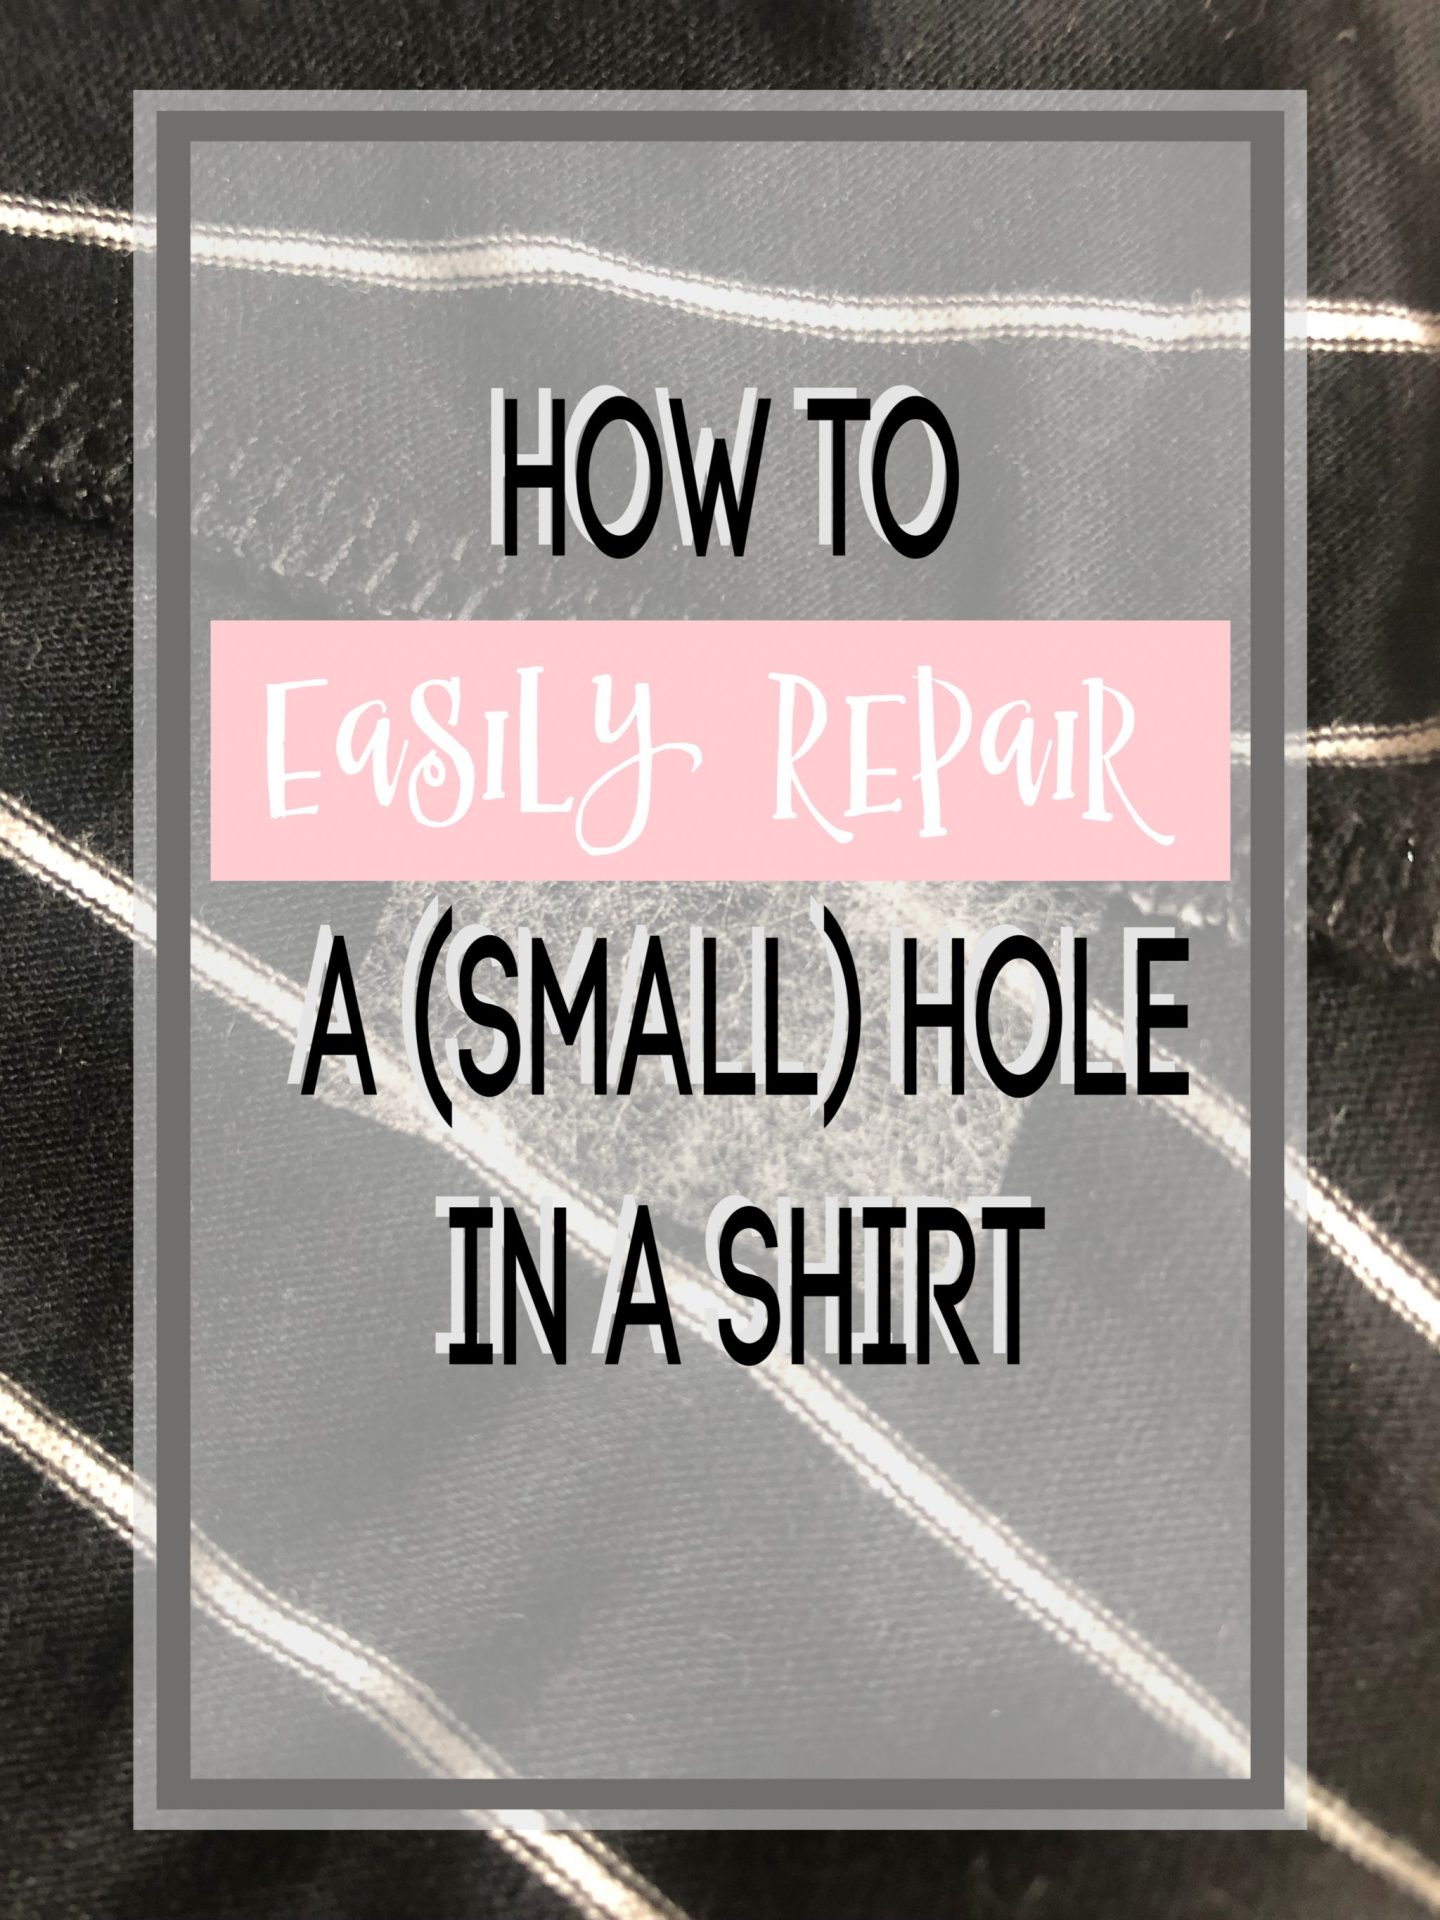 How to Easily Repair a (Small) Hole in a Shirt